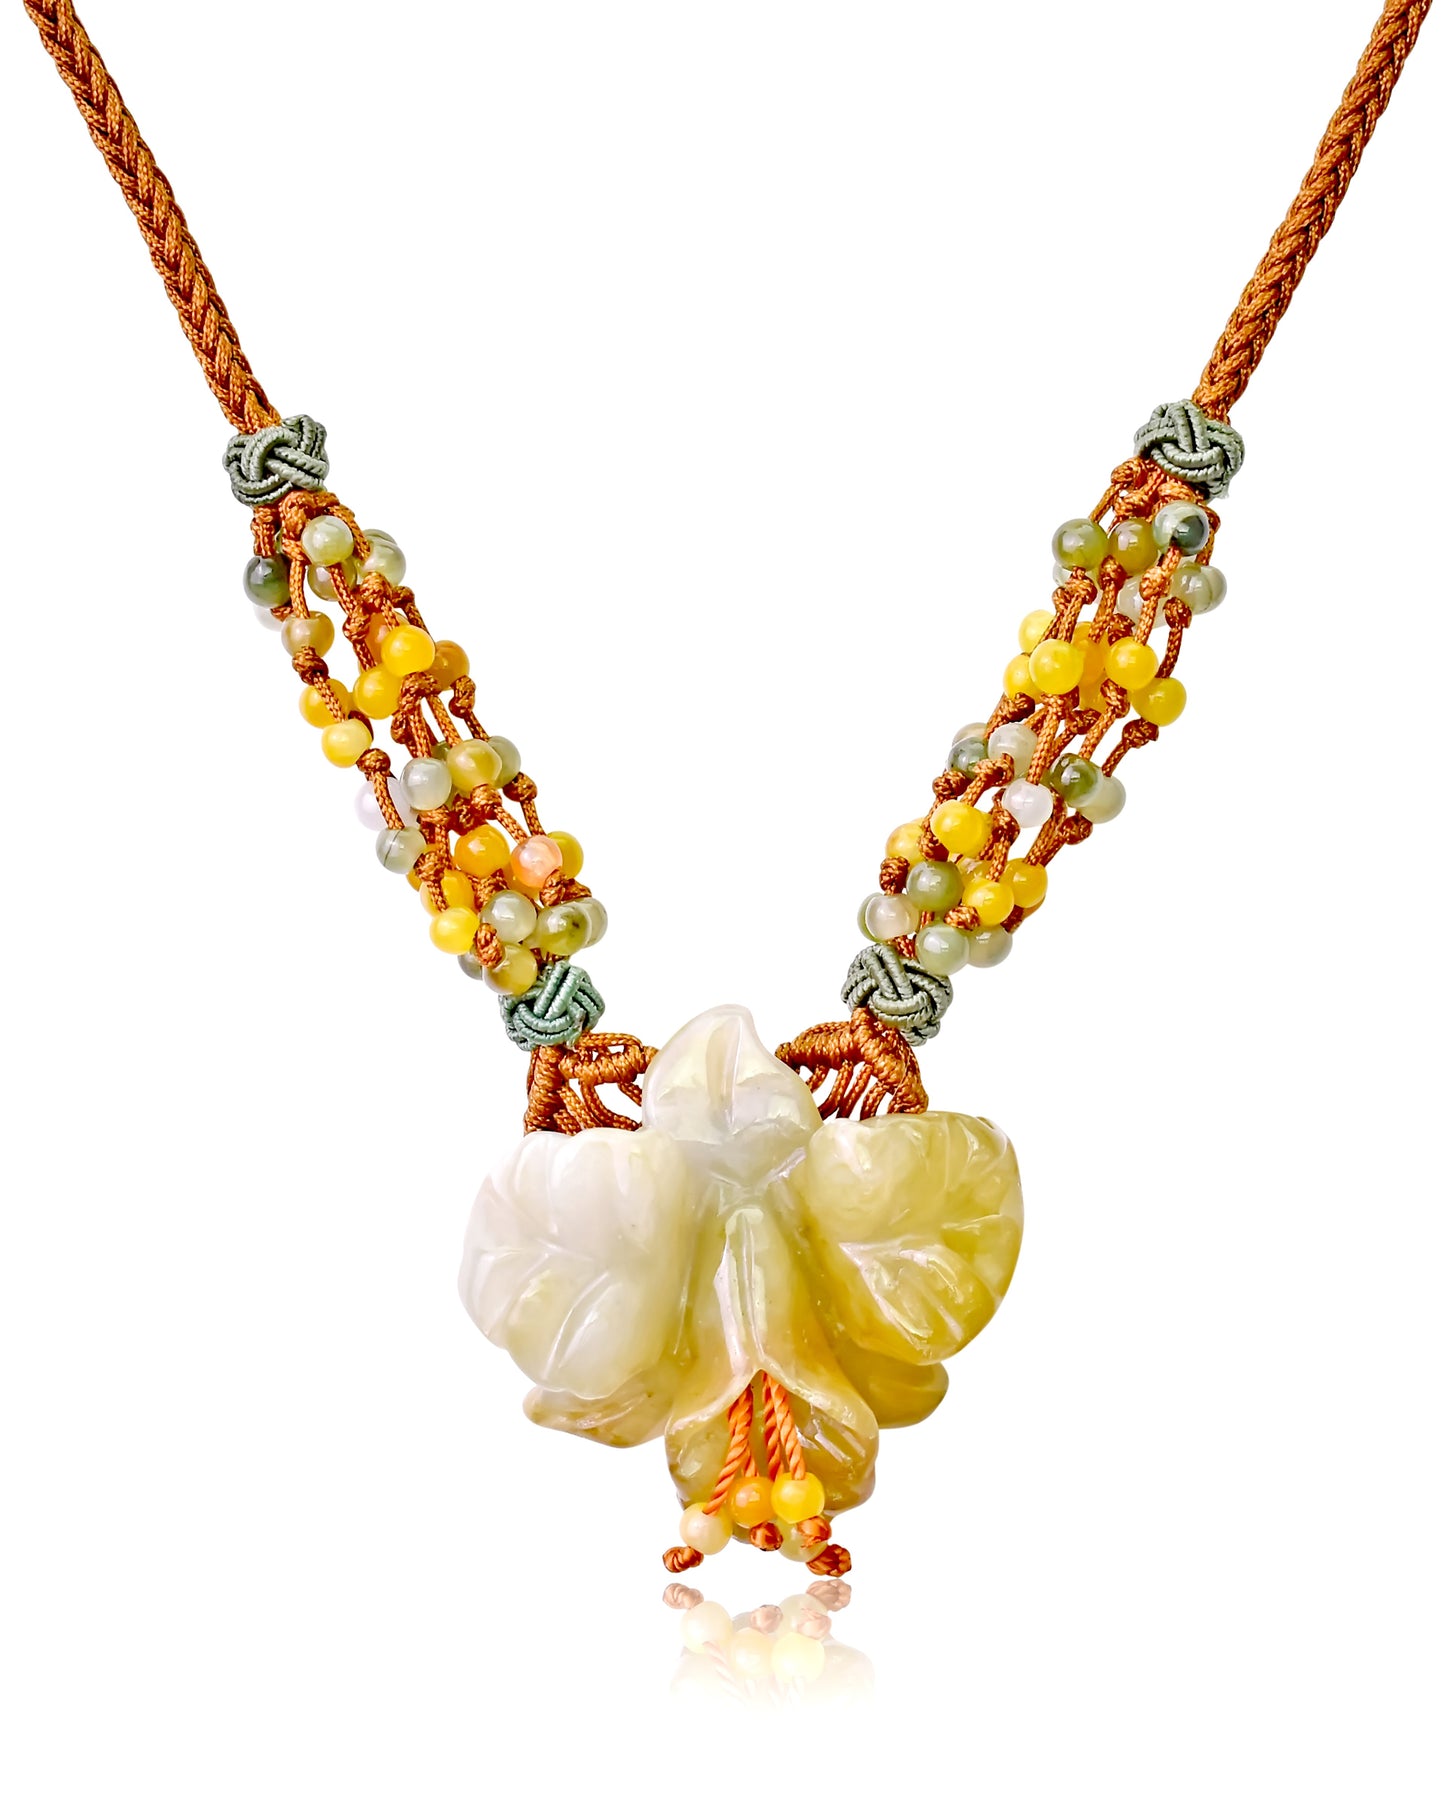 Shine Like Royalty with an Iris Flower Necklace